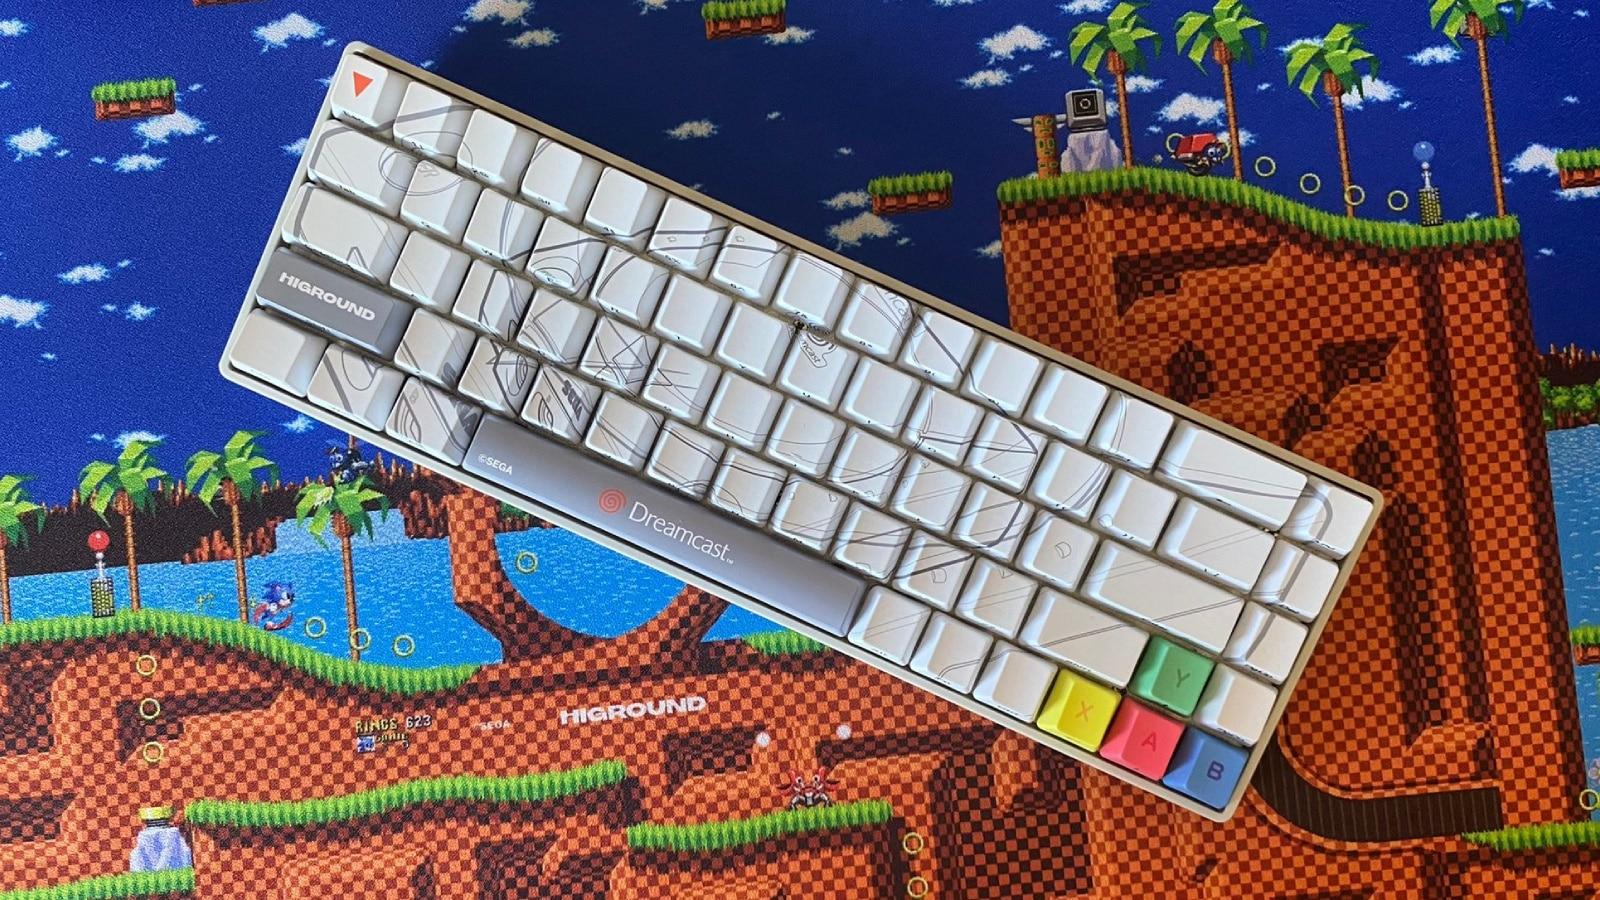 Sonic X Higround Dreamcast Keyboard on sonic mousepad